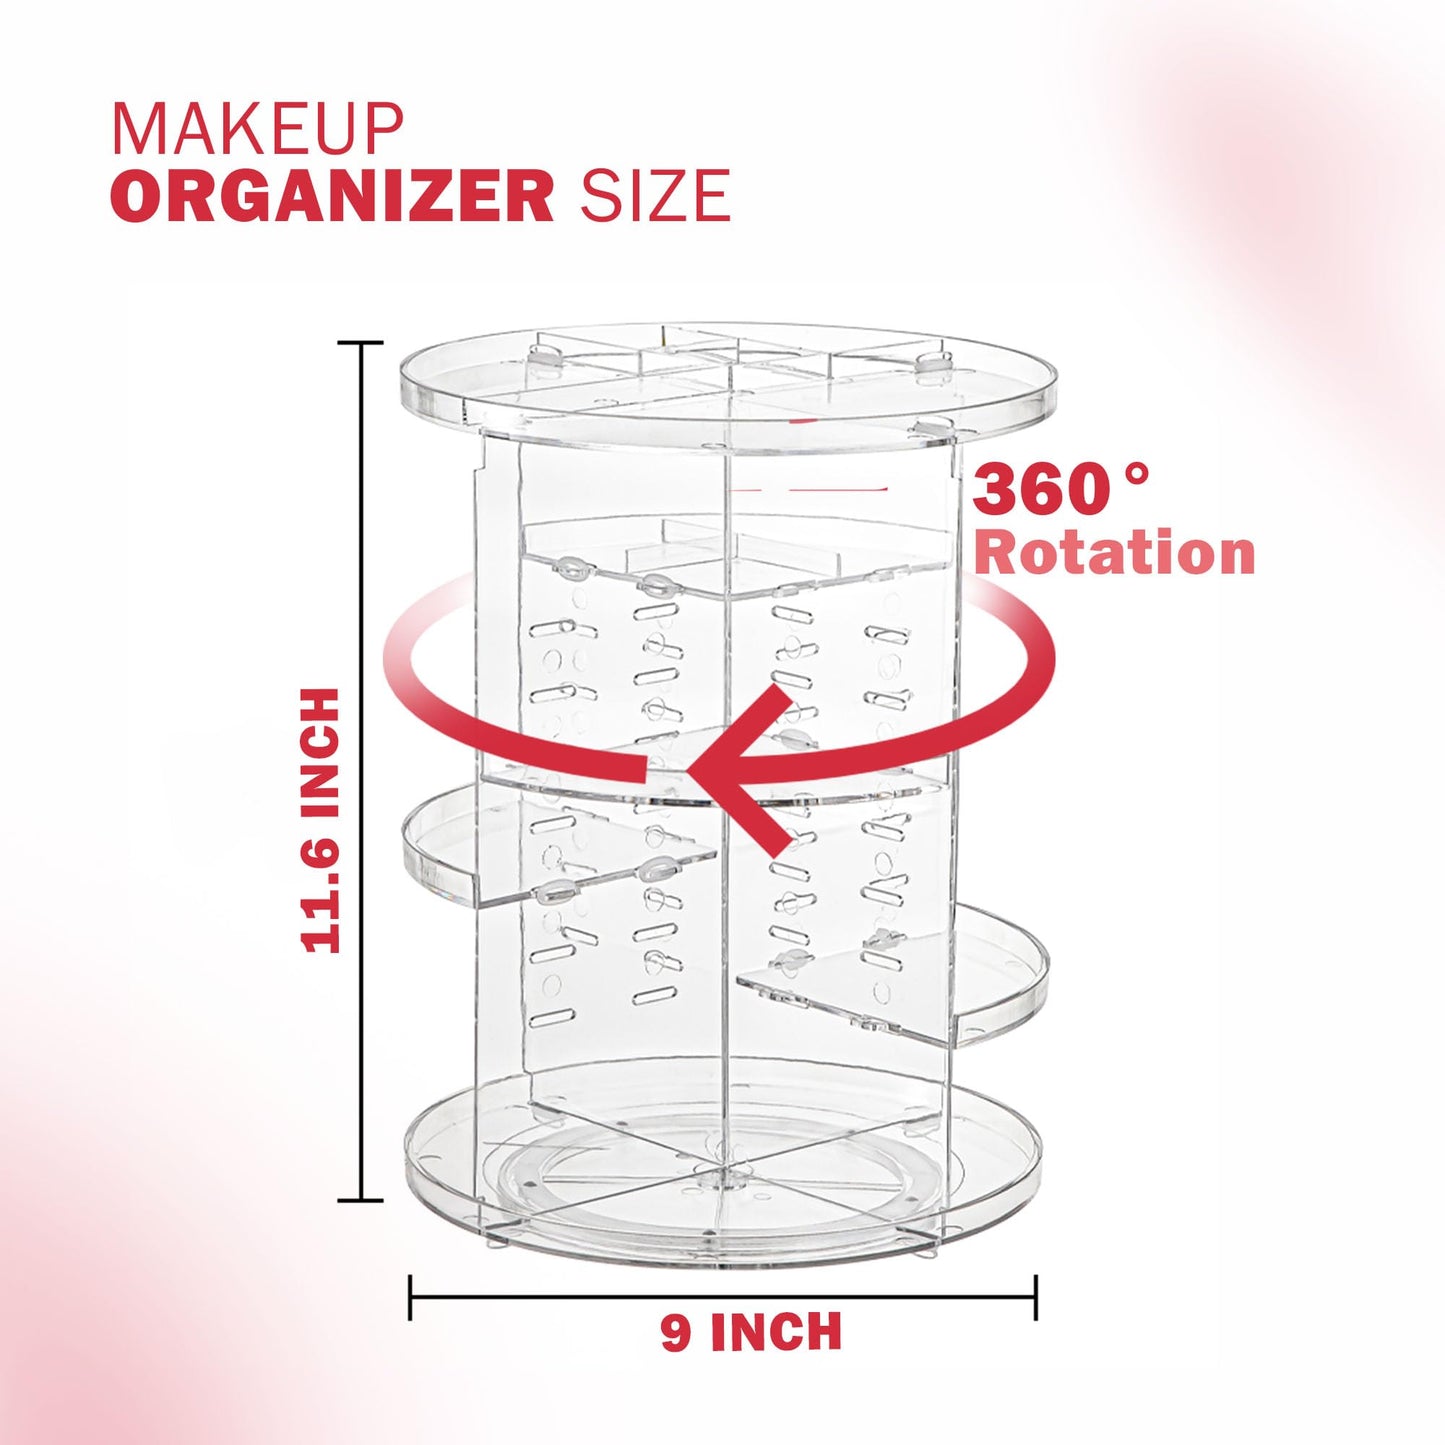 Percol 360 Skin care Organizer Acrylic Makeup 4 Trays and 8 Adjustable Levels, Elegant Makeup Storage for Essential Makeup and Skincare Products (9x9x12 inch) Rotating Makeup Organizer